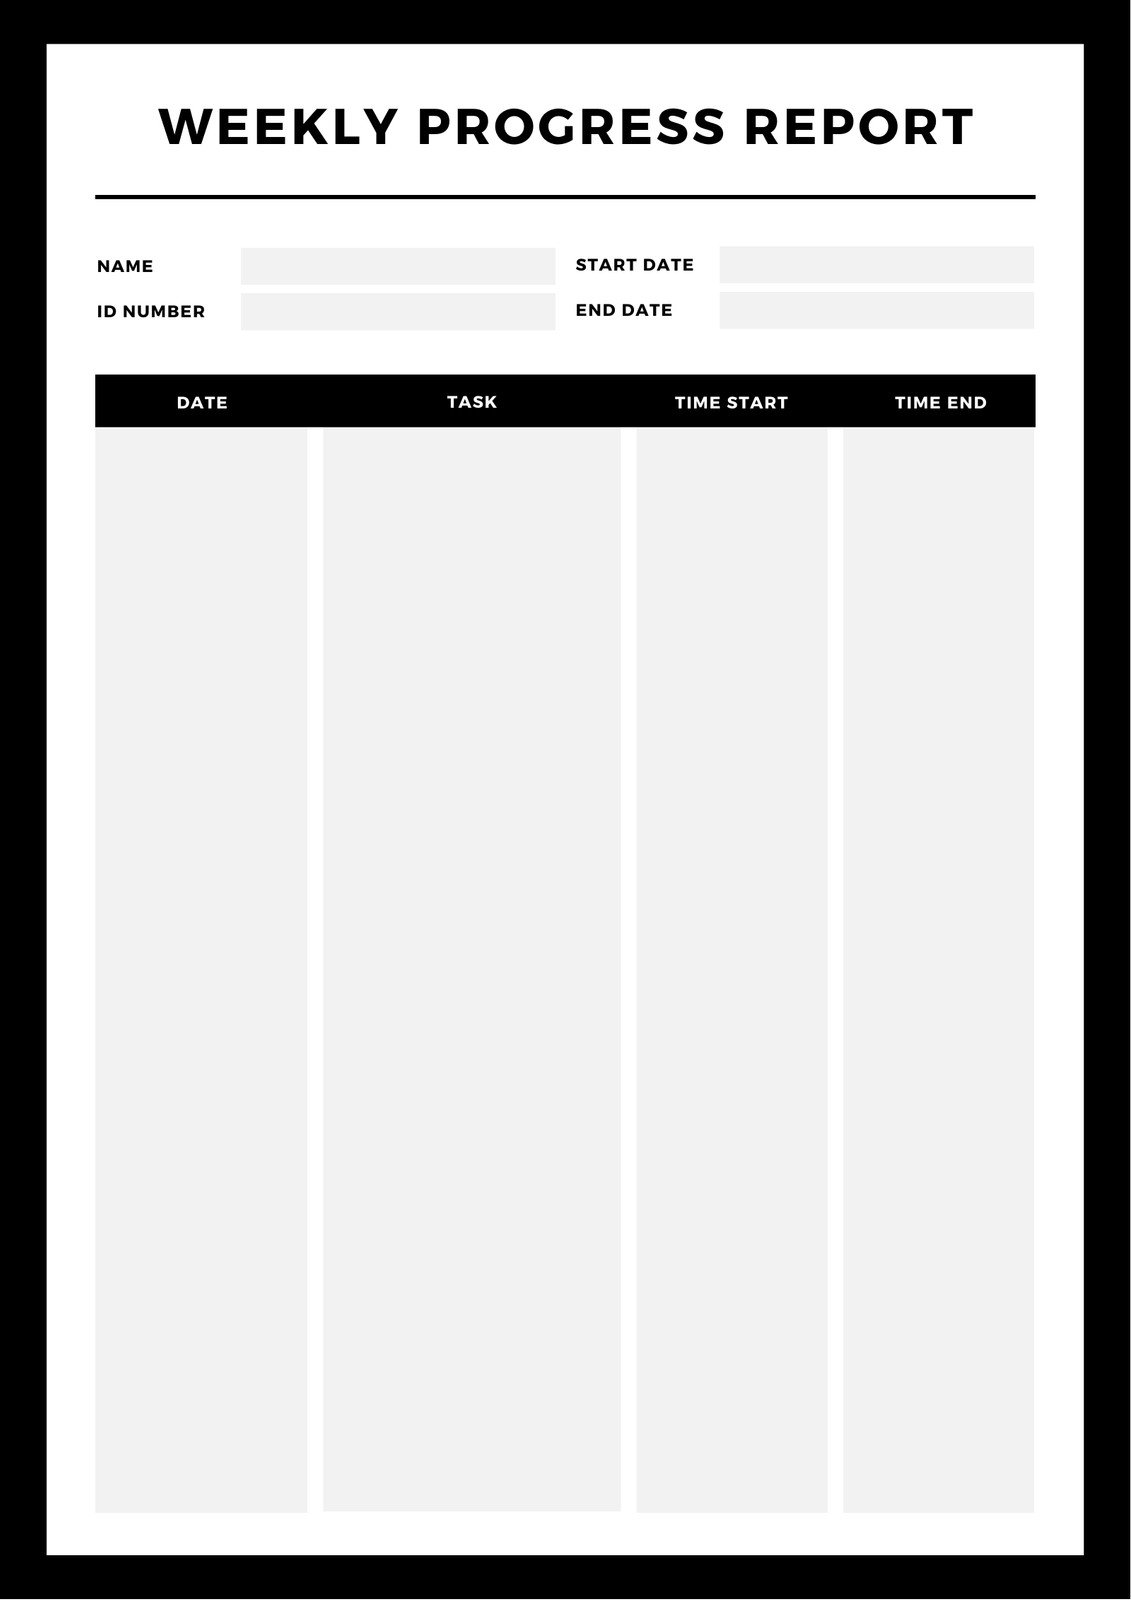 Customize 22 Weekly Reports Templates Online Canva